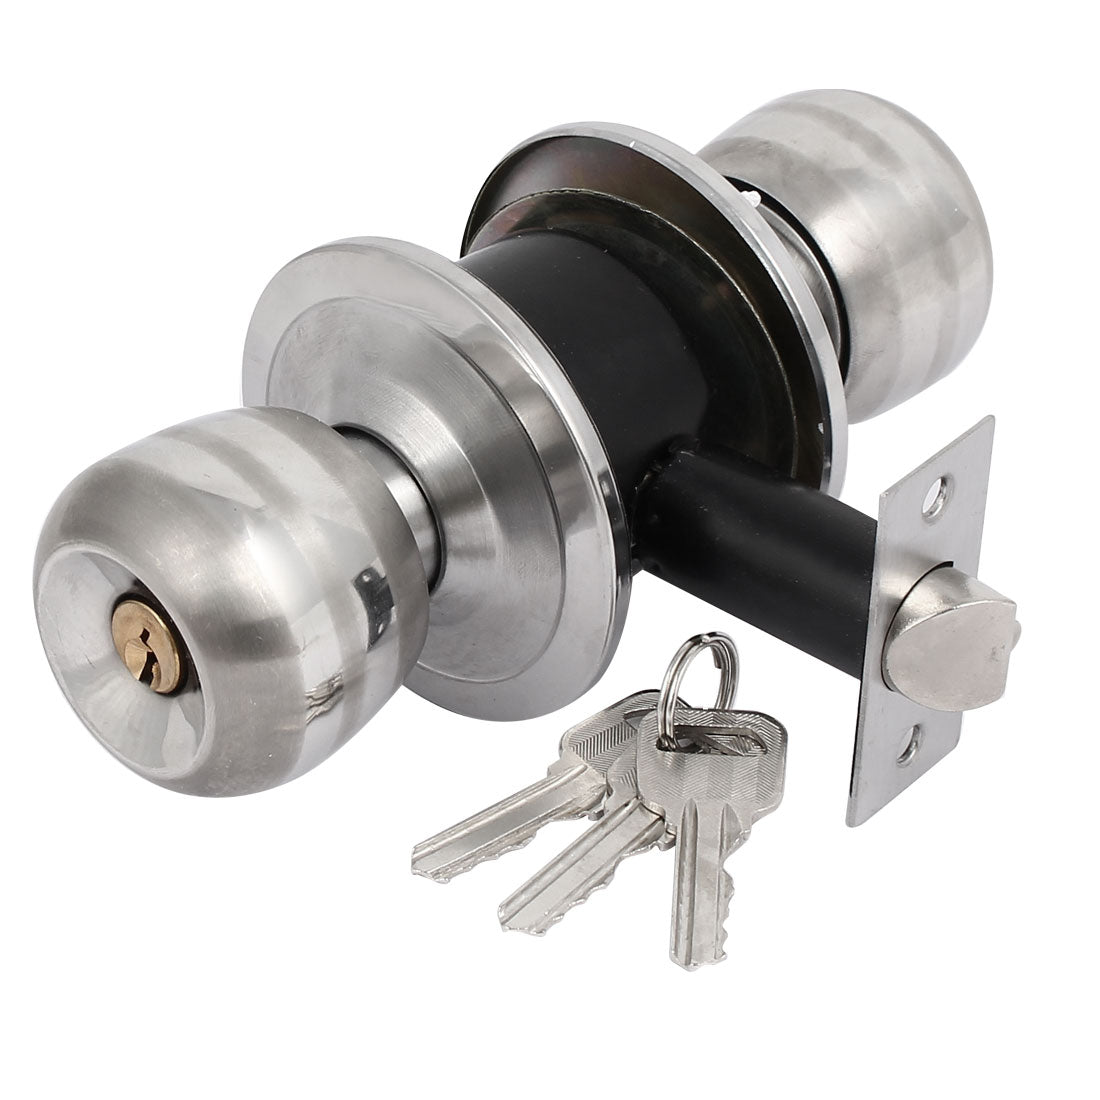 uxcell Uxcell Home Bedroom Door Stainless Steel Privacy Round Knob Lock Lockset w Keys